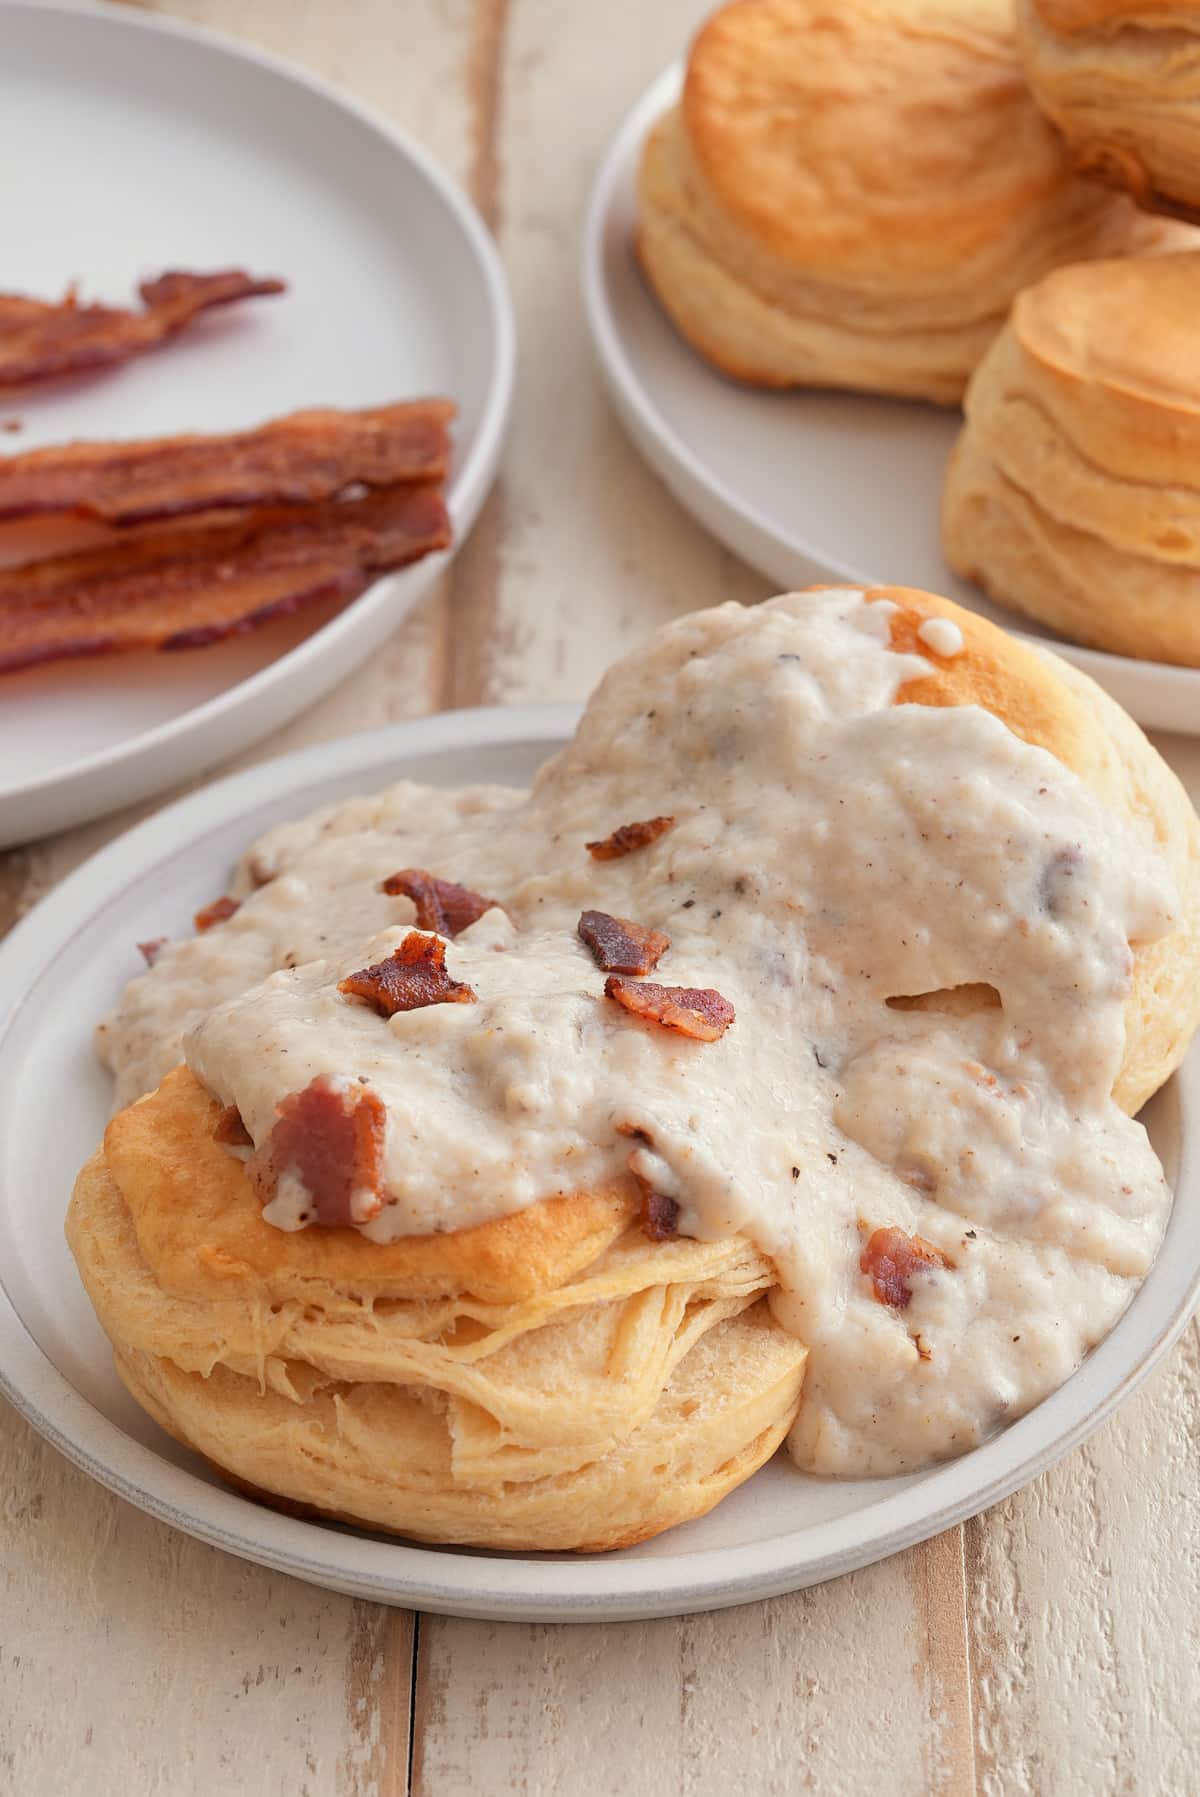 Bacon gravy is served on top of biscuits.